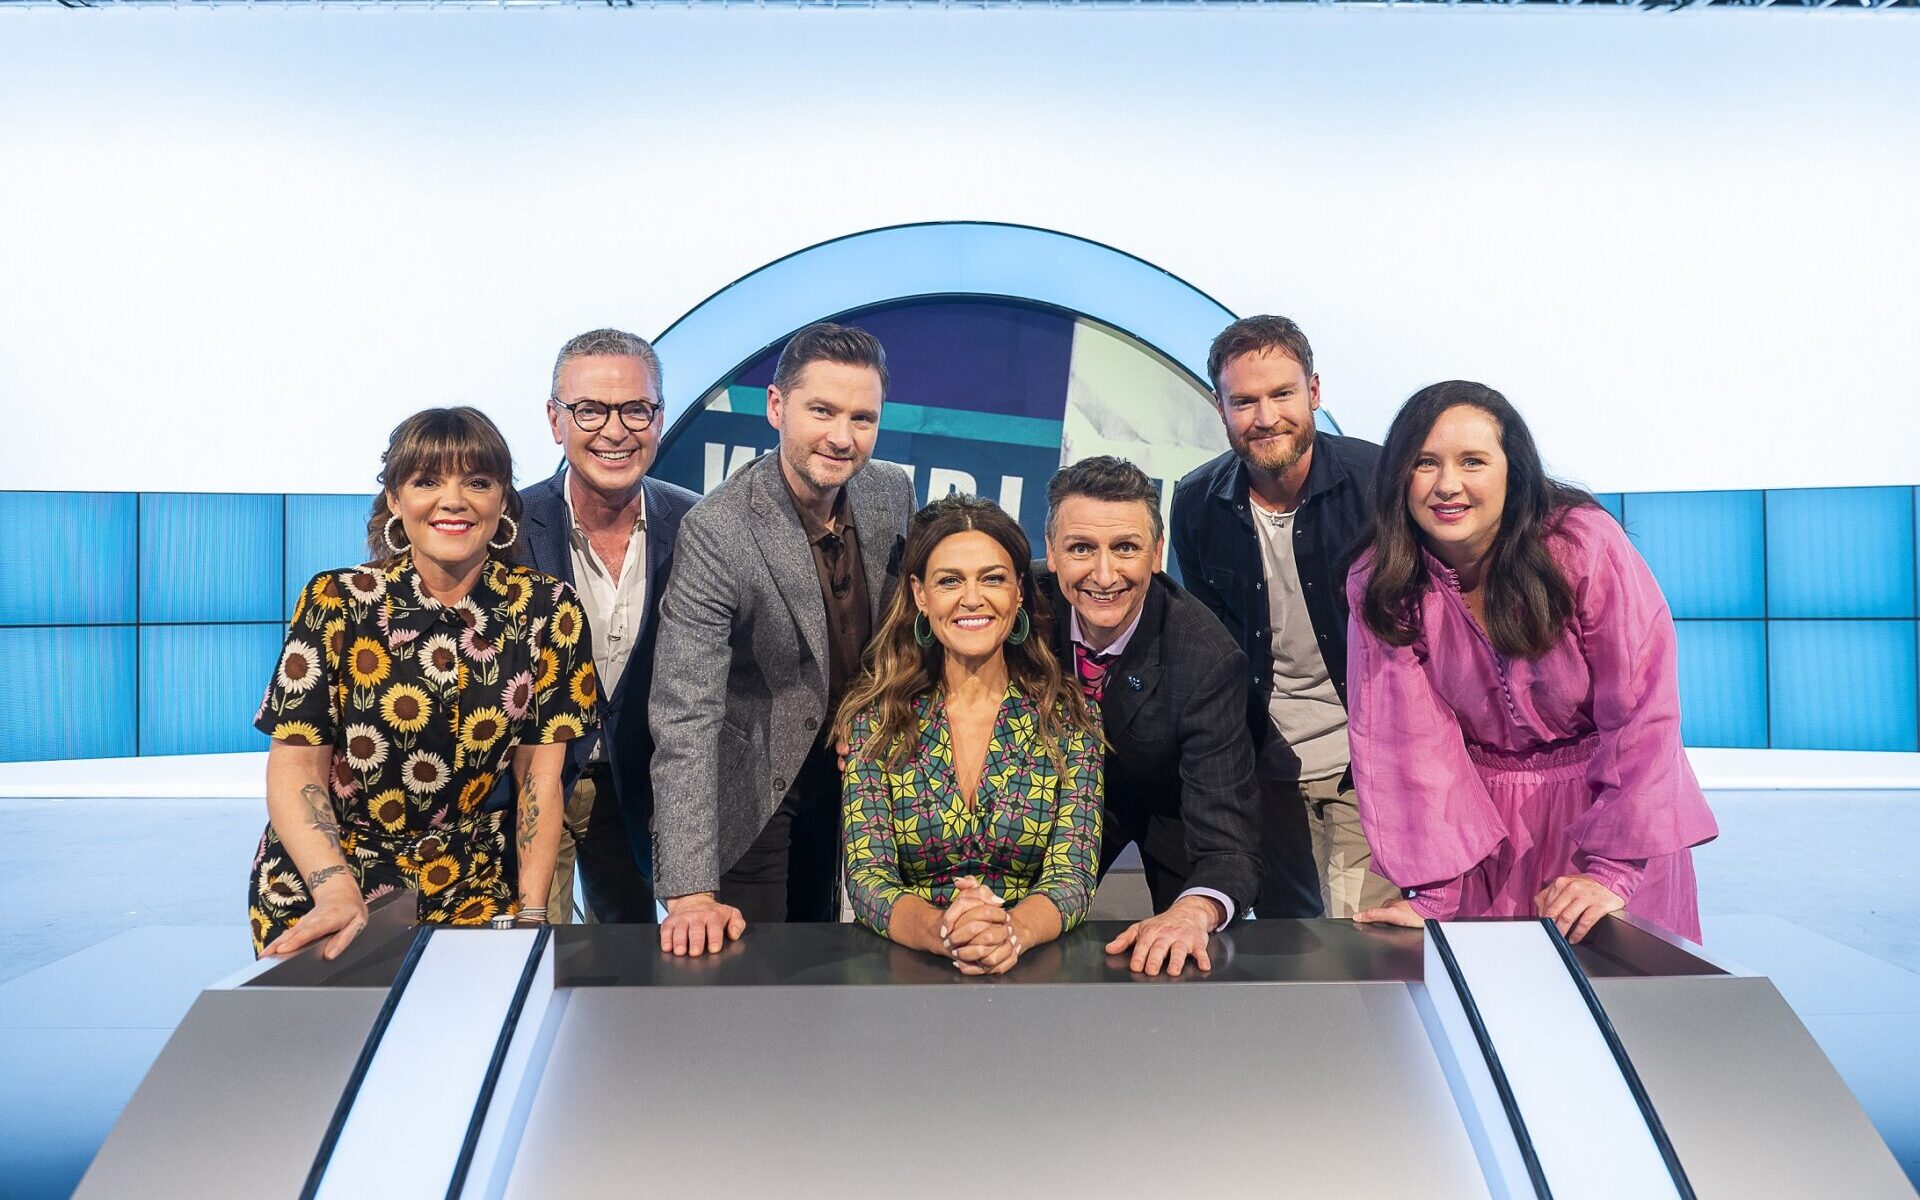 Would I Lie to You Australia - Em Rusciano, Christopher Pyne, Charlie Pickering, Chrissie Swan, Frank Woodley, Josh Lawson and Mel Buttle